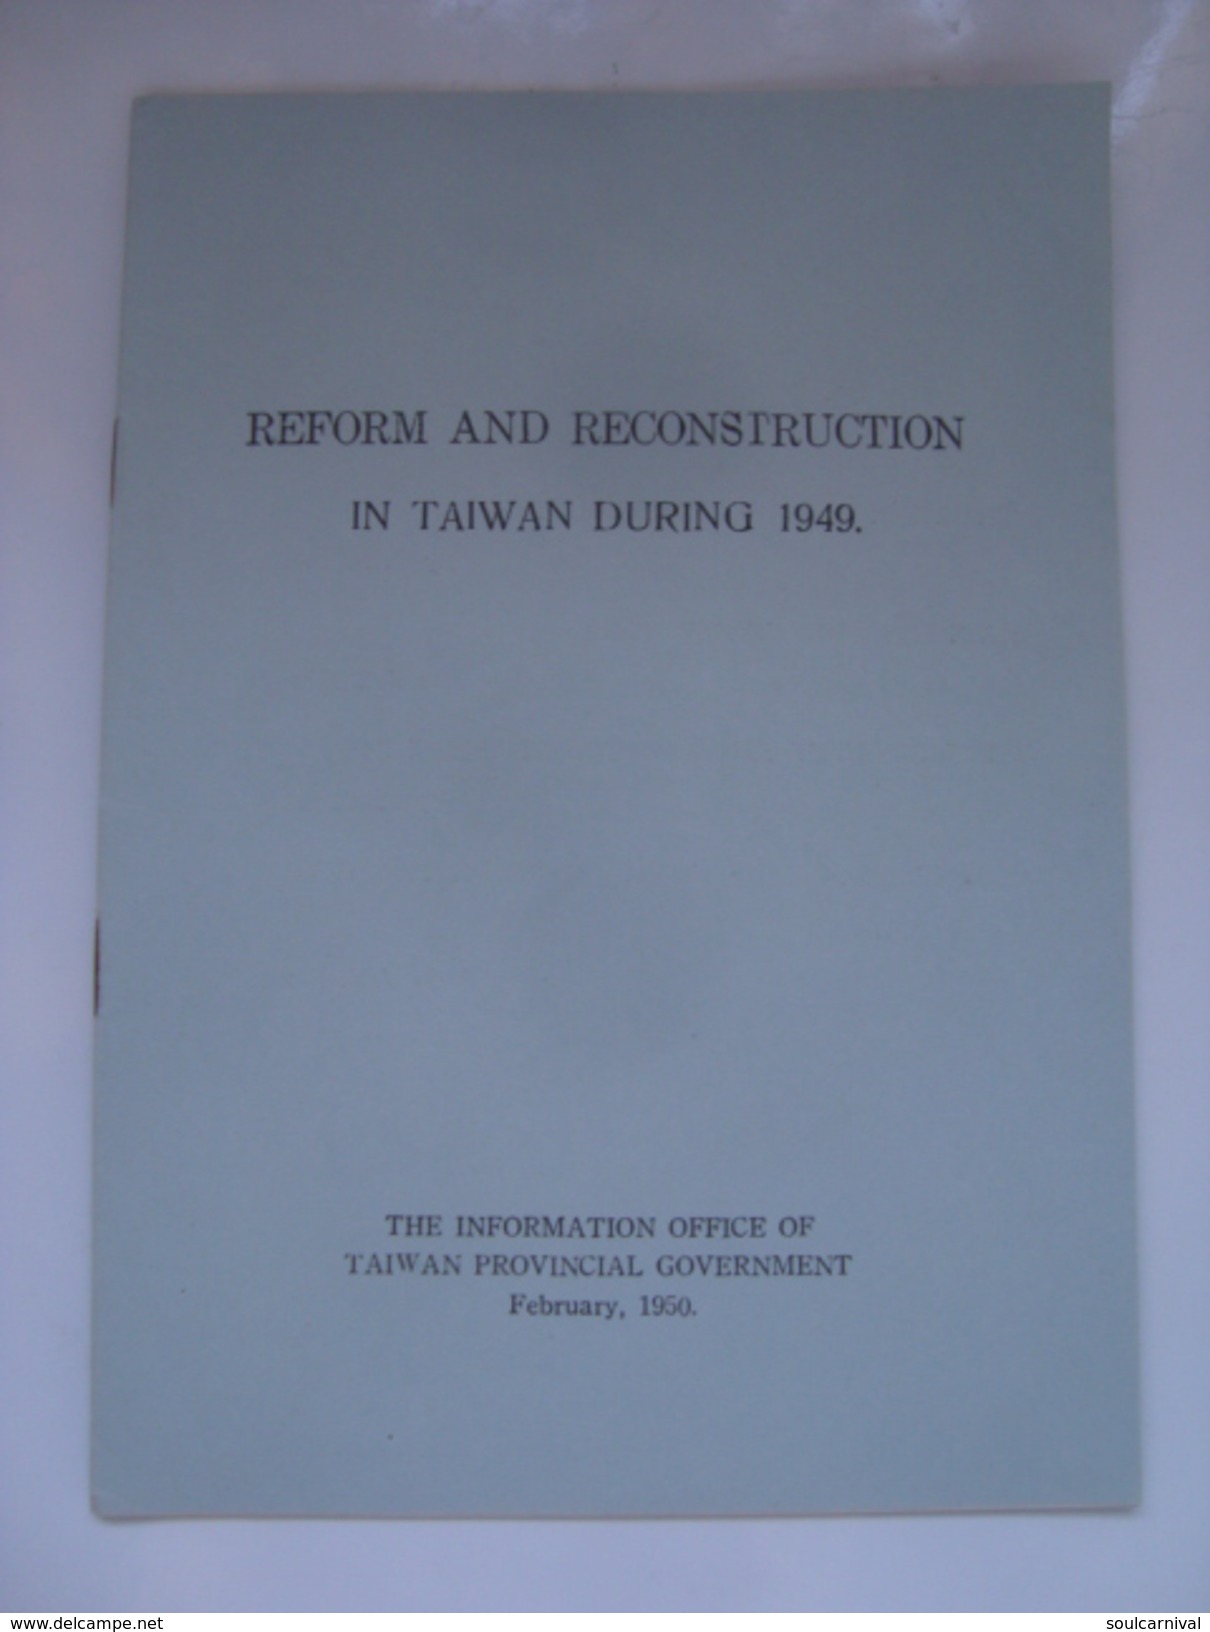 REFORM AND RECONSTRUCTION IN TAIWAN DURING 1949 - INFORMATION OFFICE OF TAIWAN PROVINCIAL GOVERNMENT. T. N. TSAI. - Asia